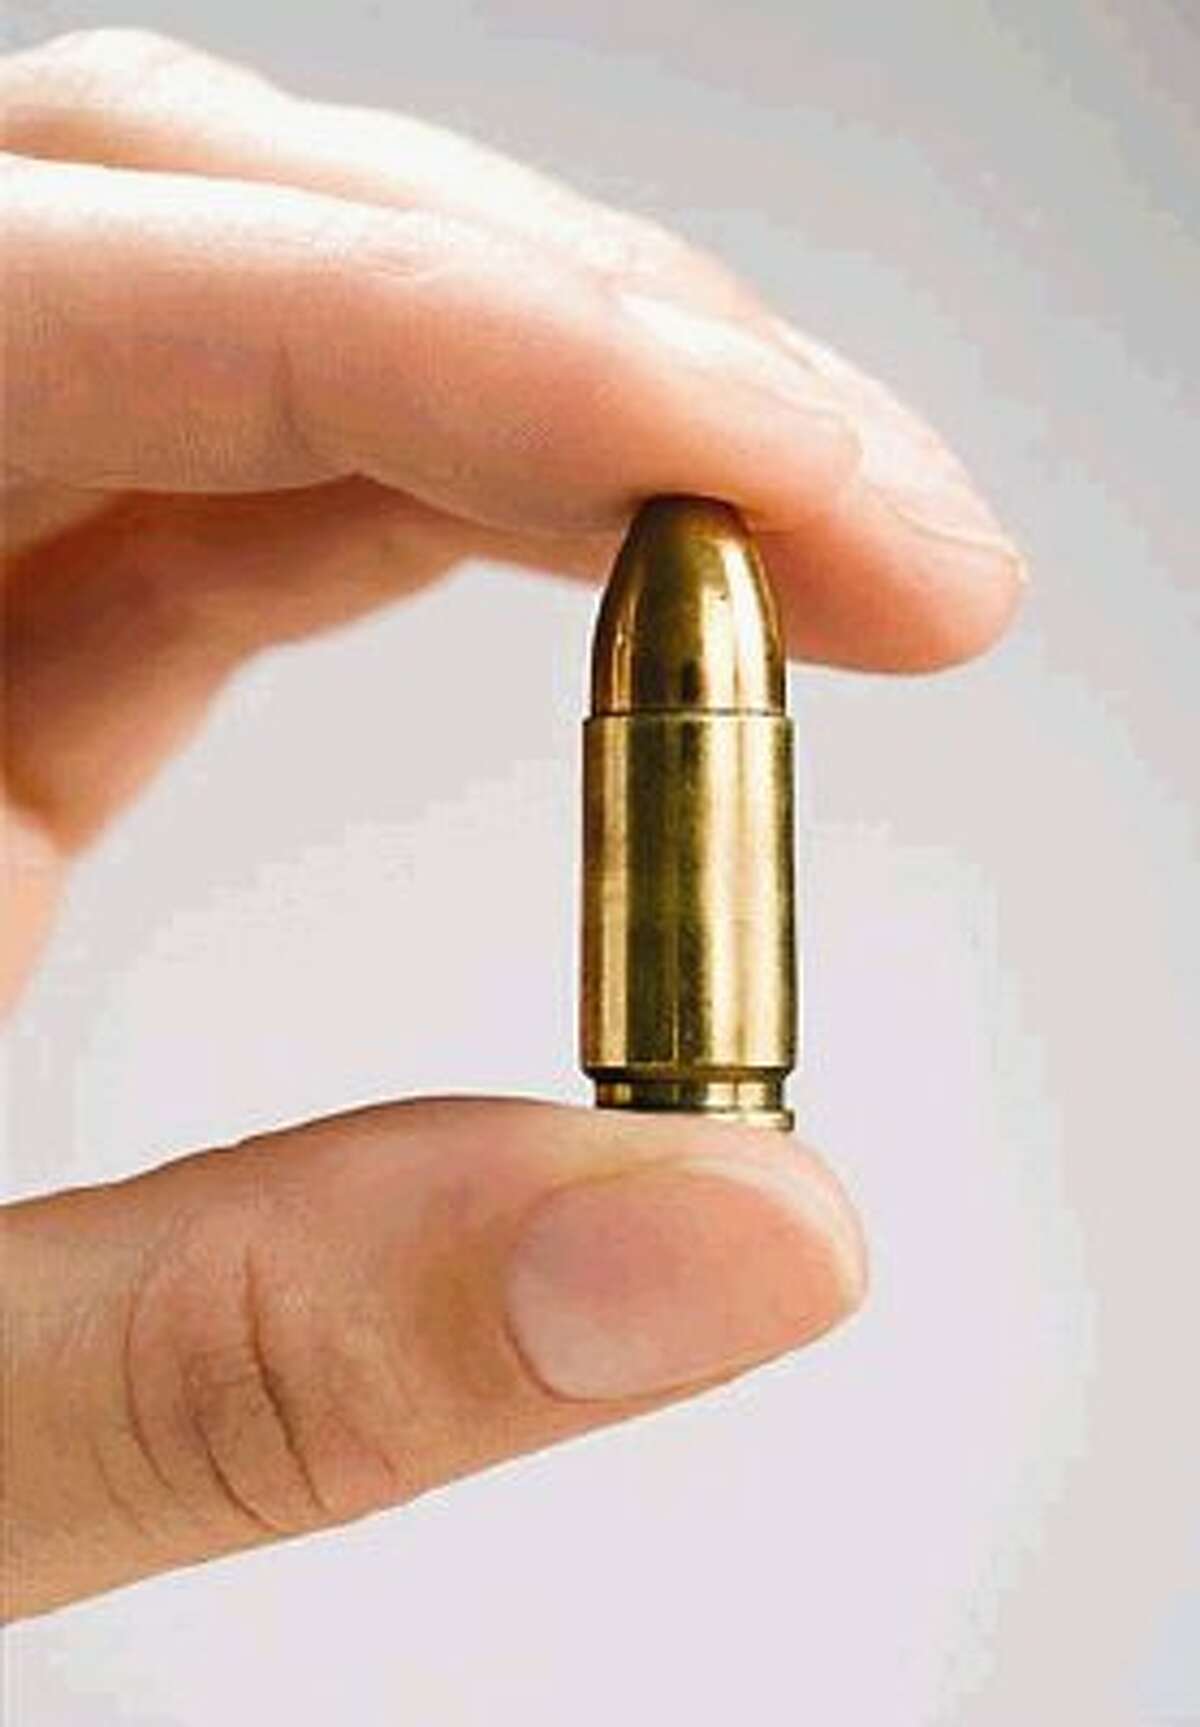 A nationwide shortage of ammunition has hunters, sportsmen and gun enthusiasts scrambling to find bullets at any cost.